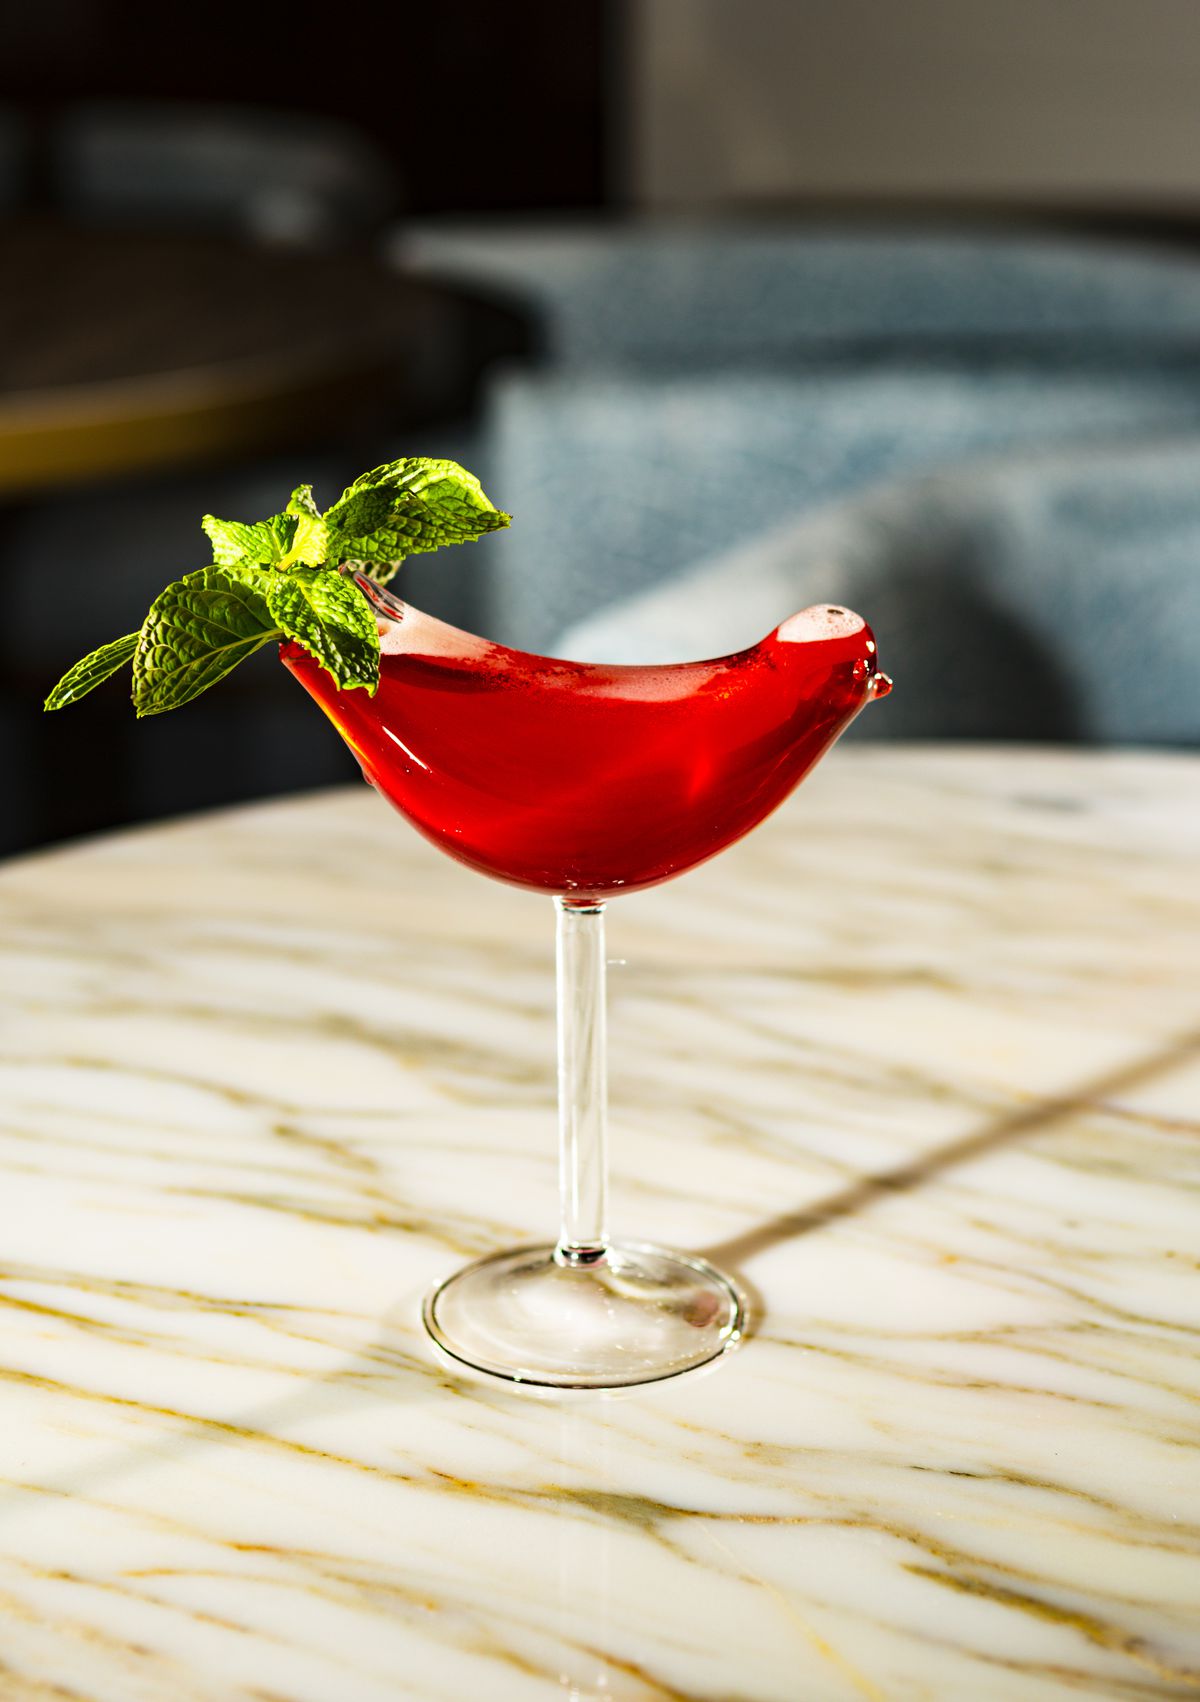 A red cocktail in a bird-shaped glass.